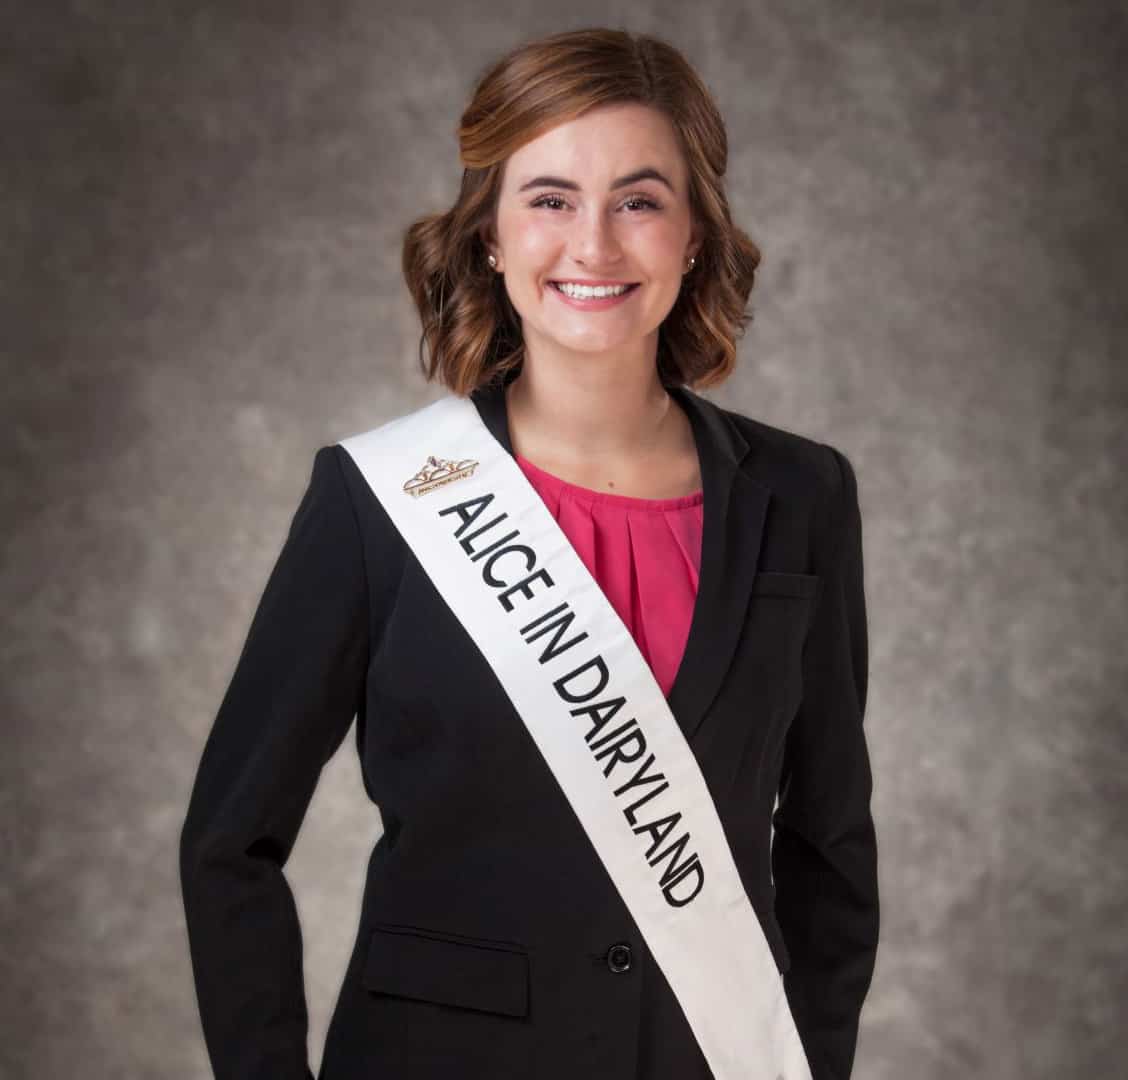 75th Alice in Dairyland applications open through Feb. 4